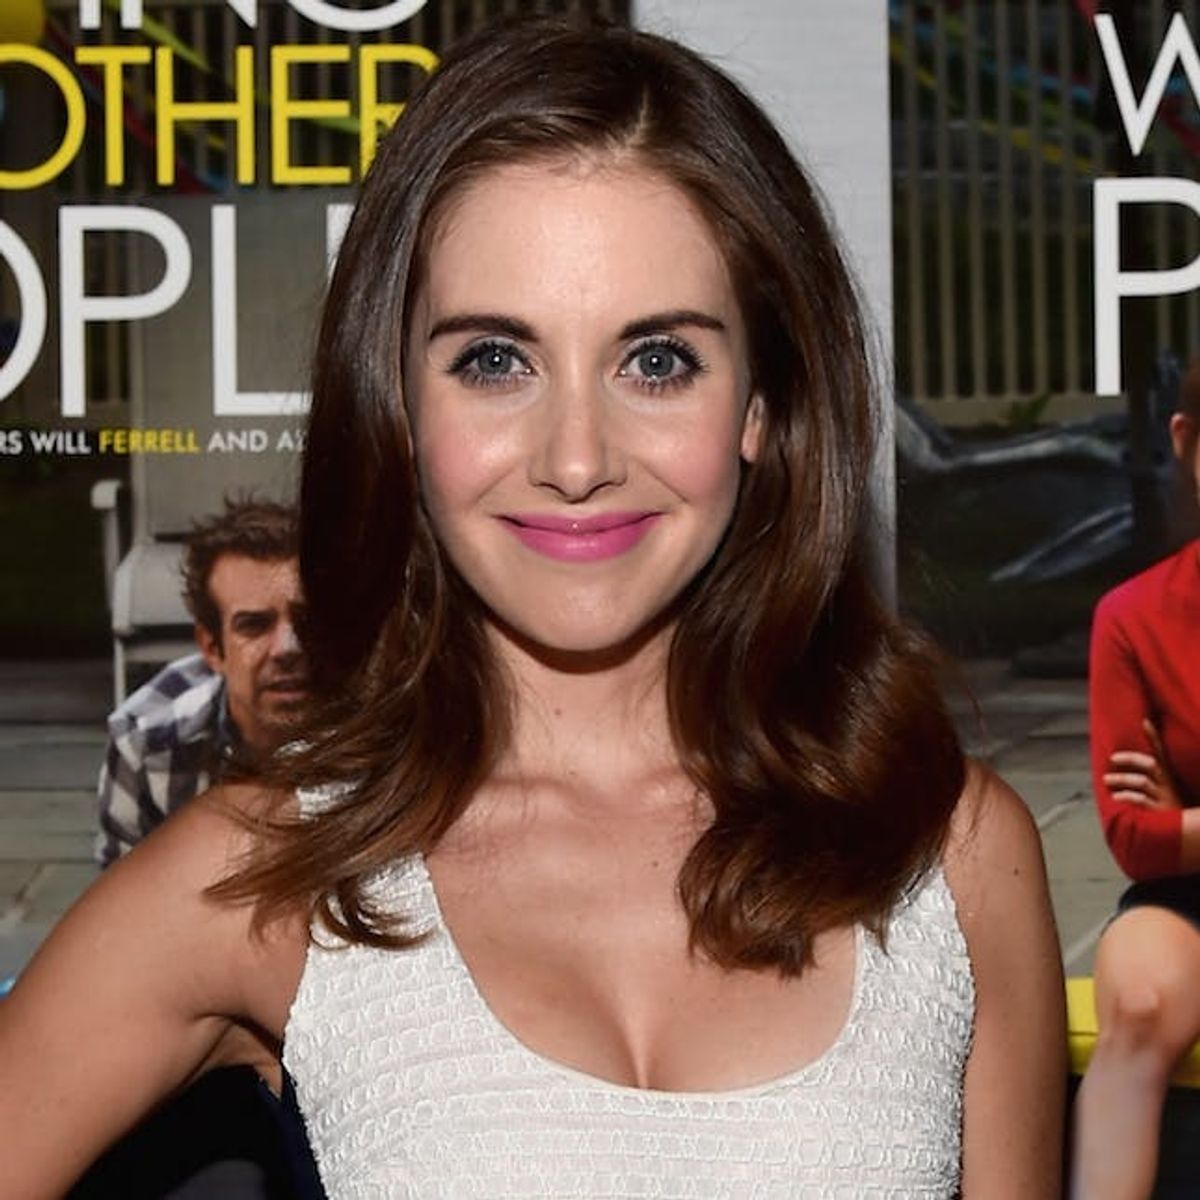 Alison Brie and Dave Franco Got Engaged and Her Ring Is GORGEOUS